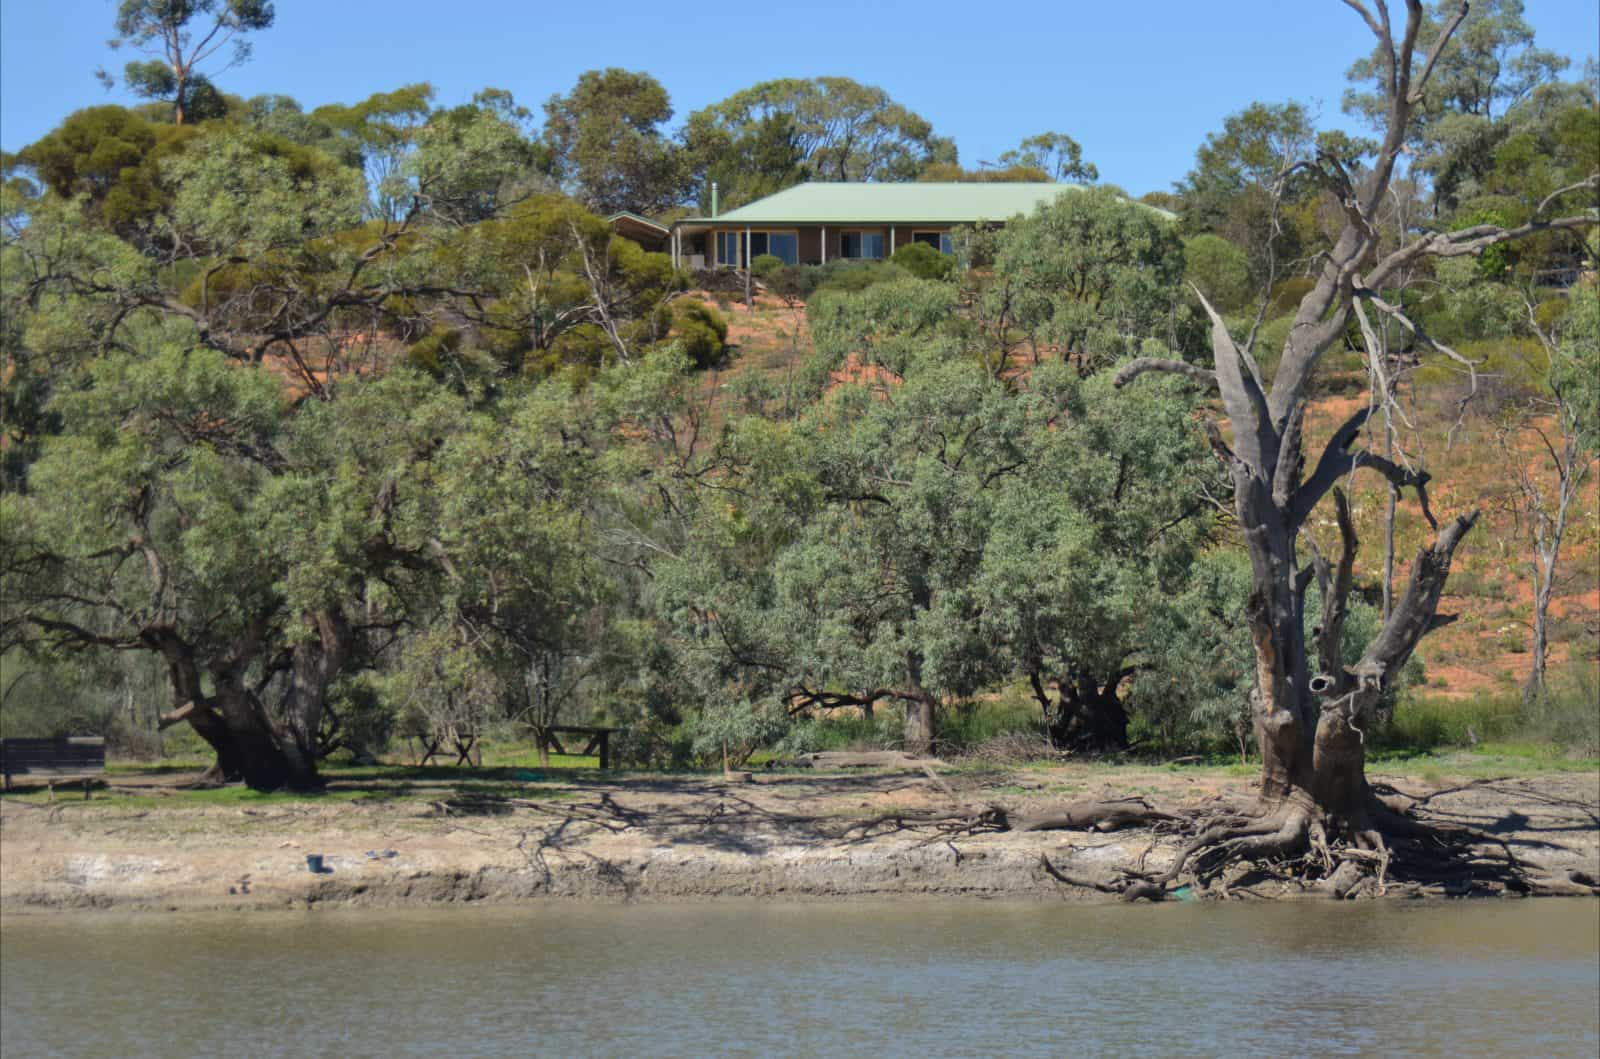 The house from Pike river